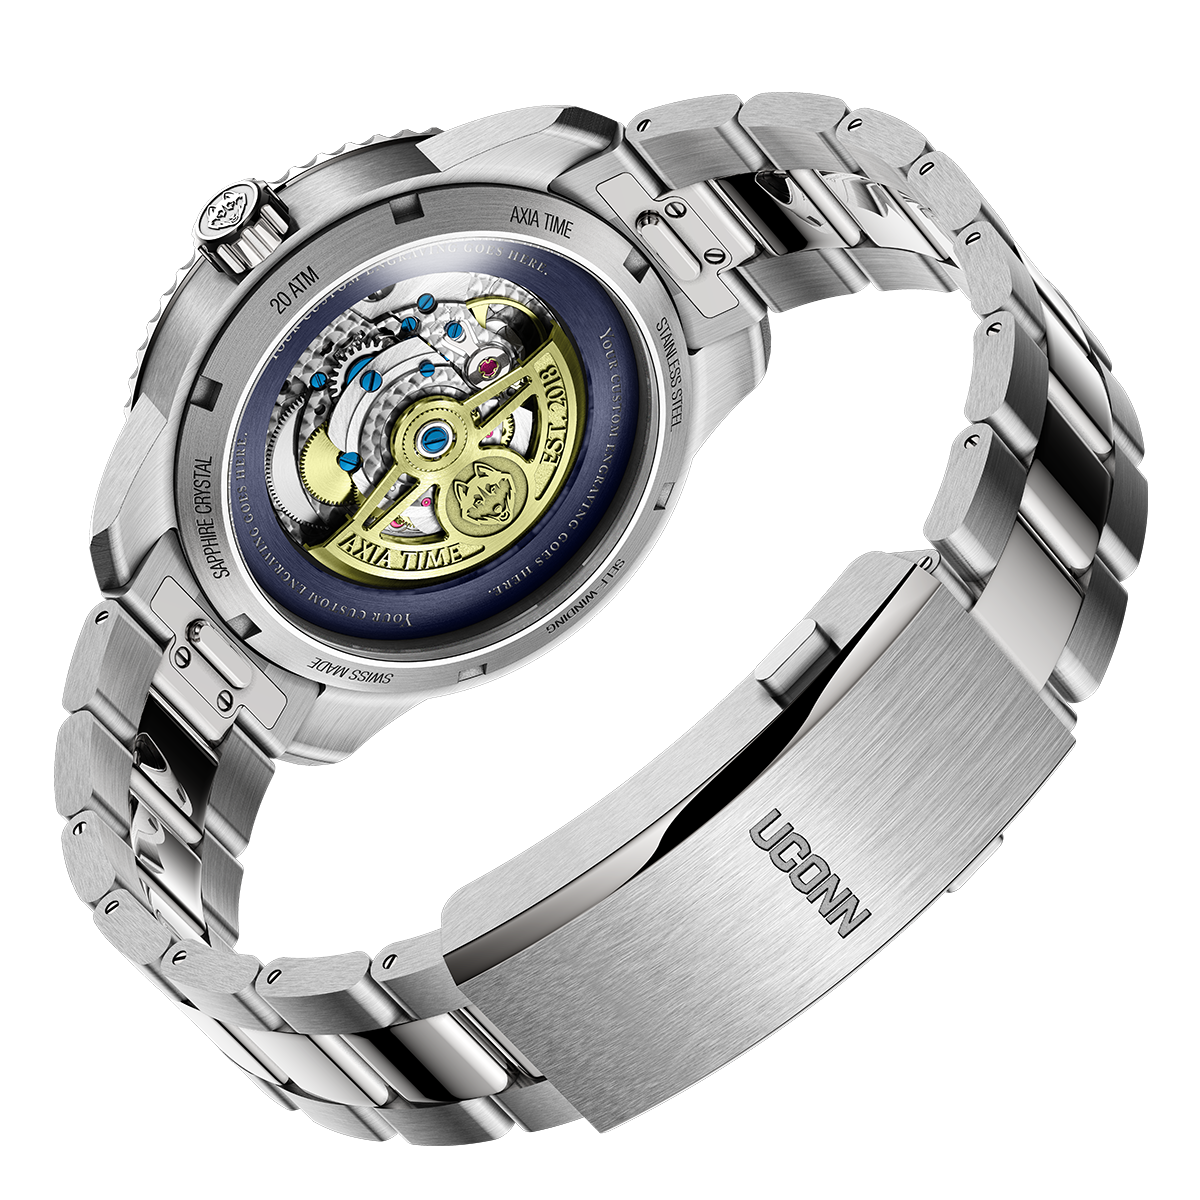 UCONN 2024 National Champions Swiss made automatic watch. Back to back champions. Back view.